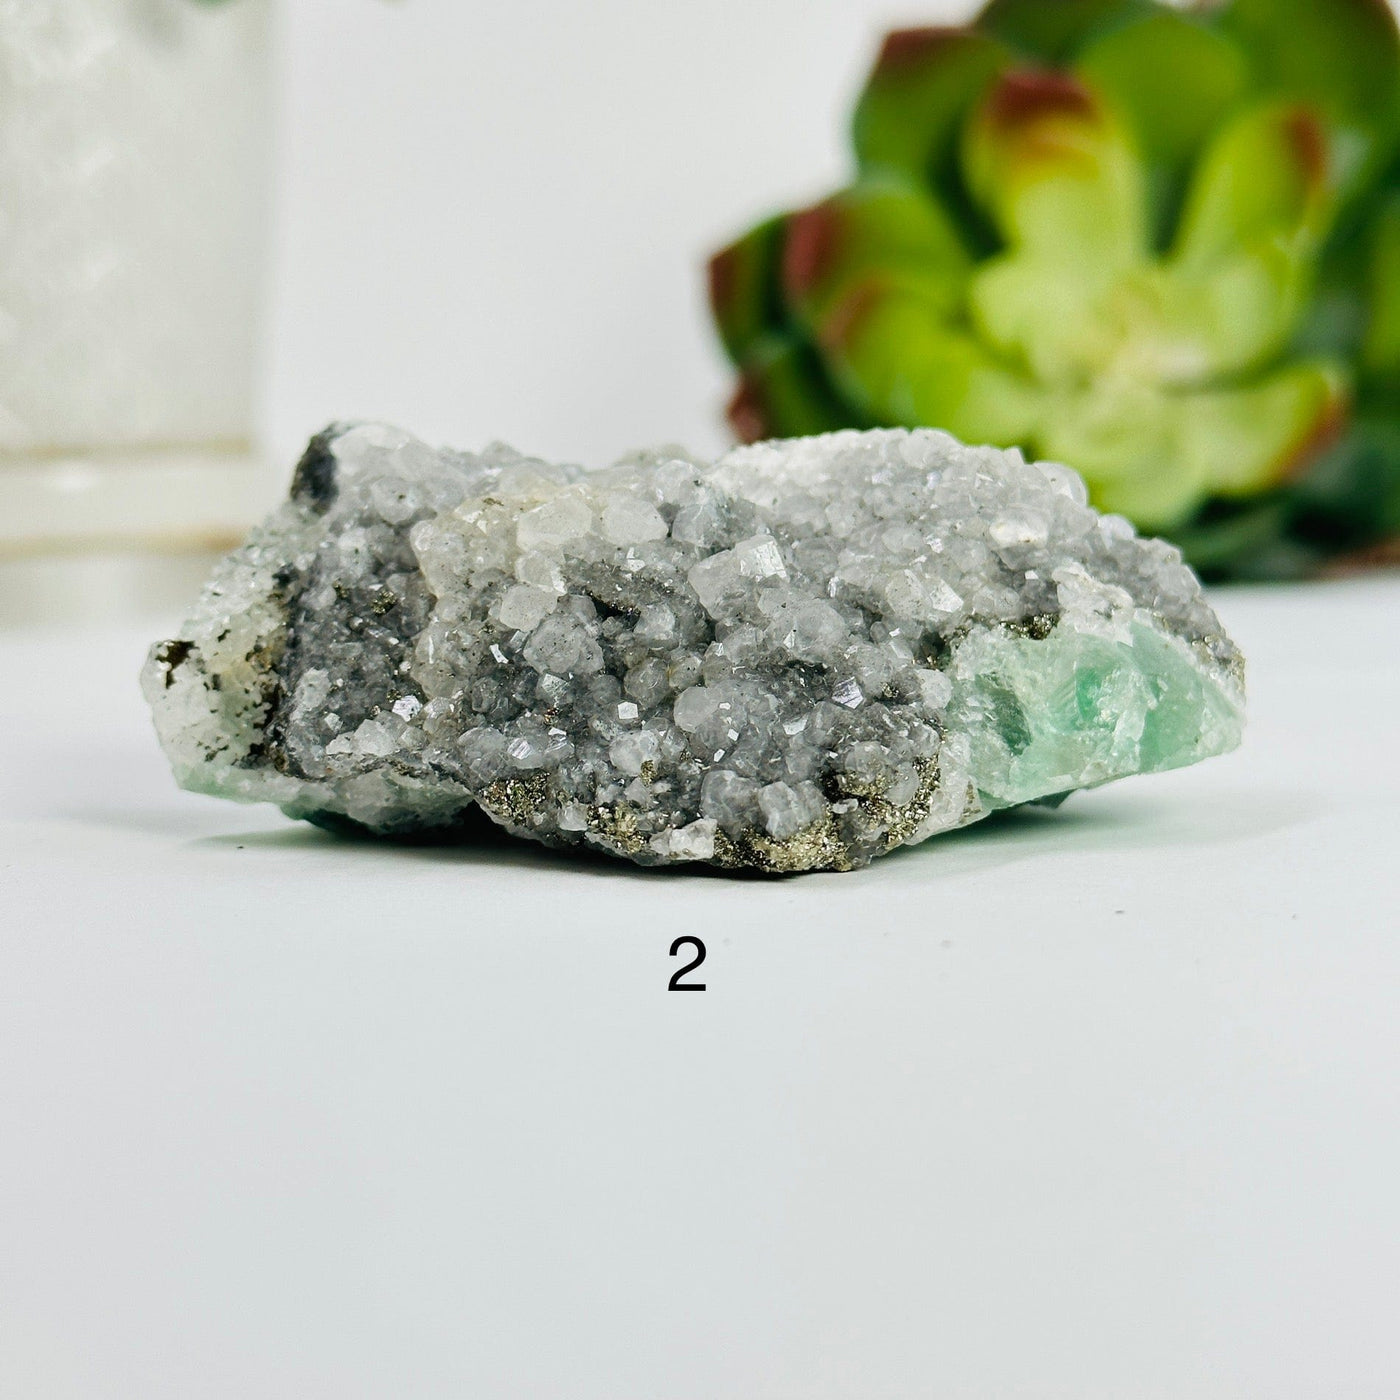 variant 2 of fluorite with pyrite and crystal quartz growth with decorations in the background